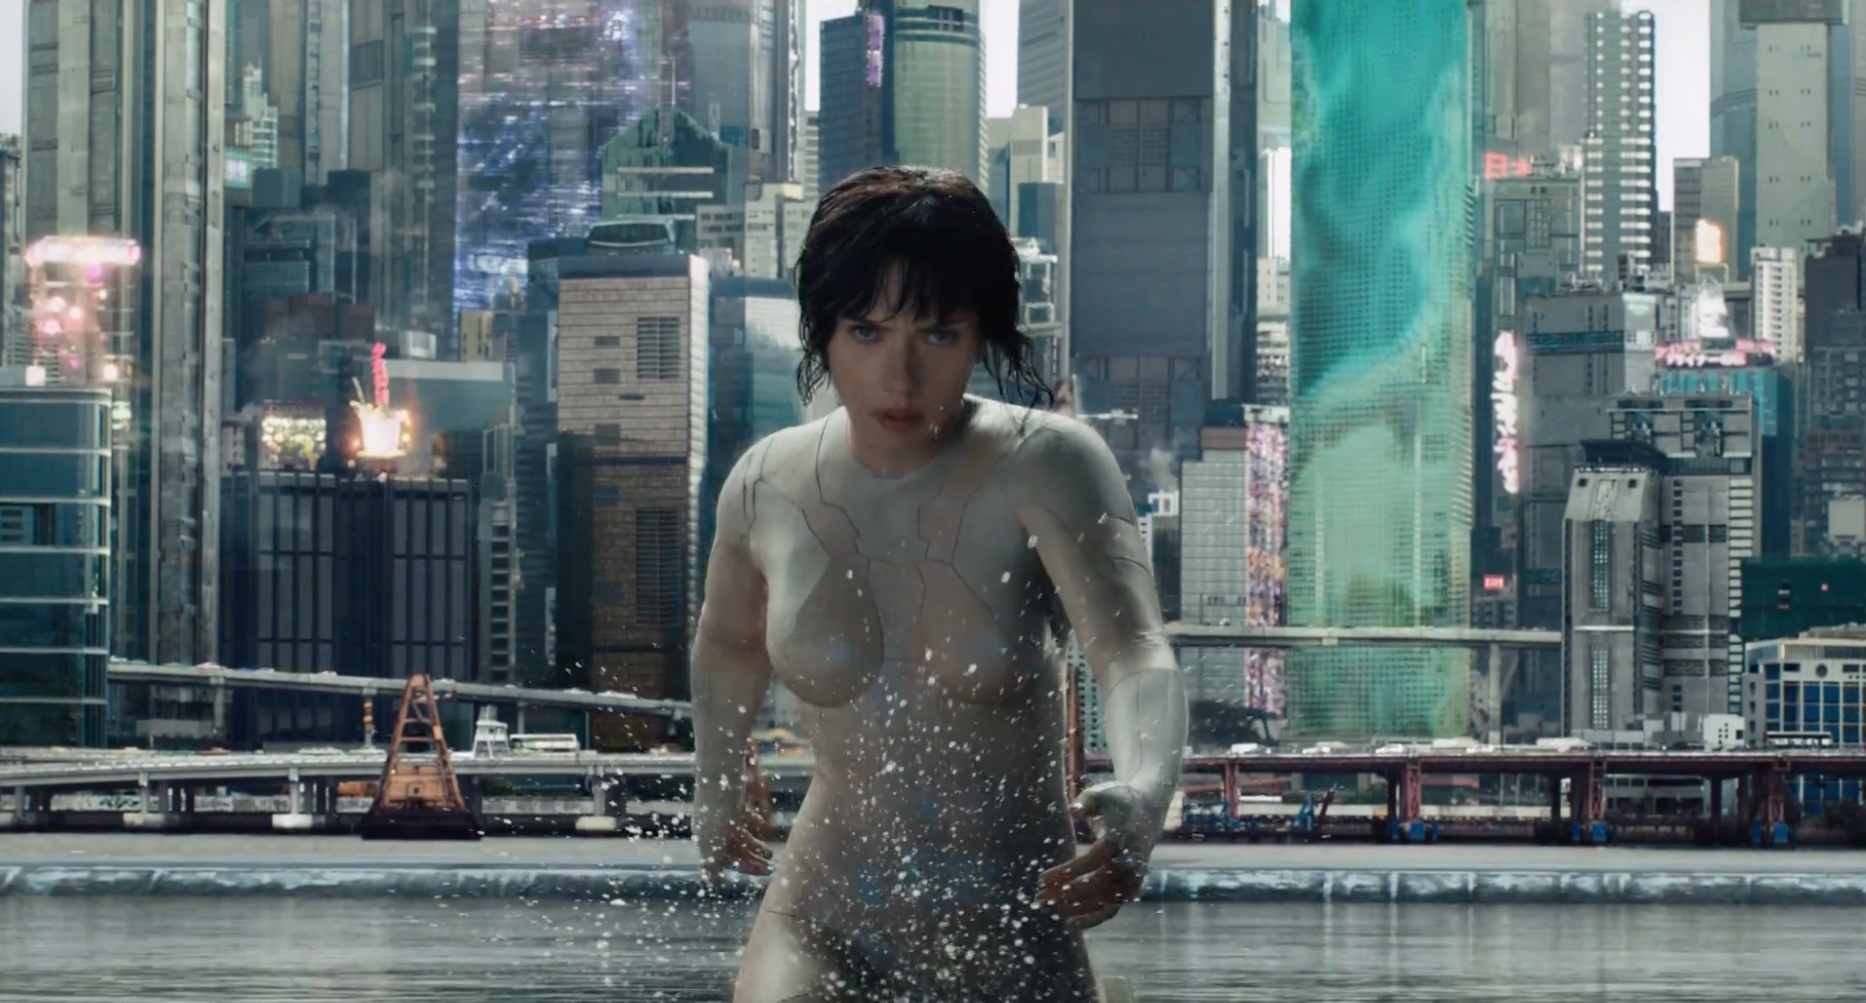 Ghost in the shell naked